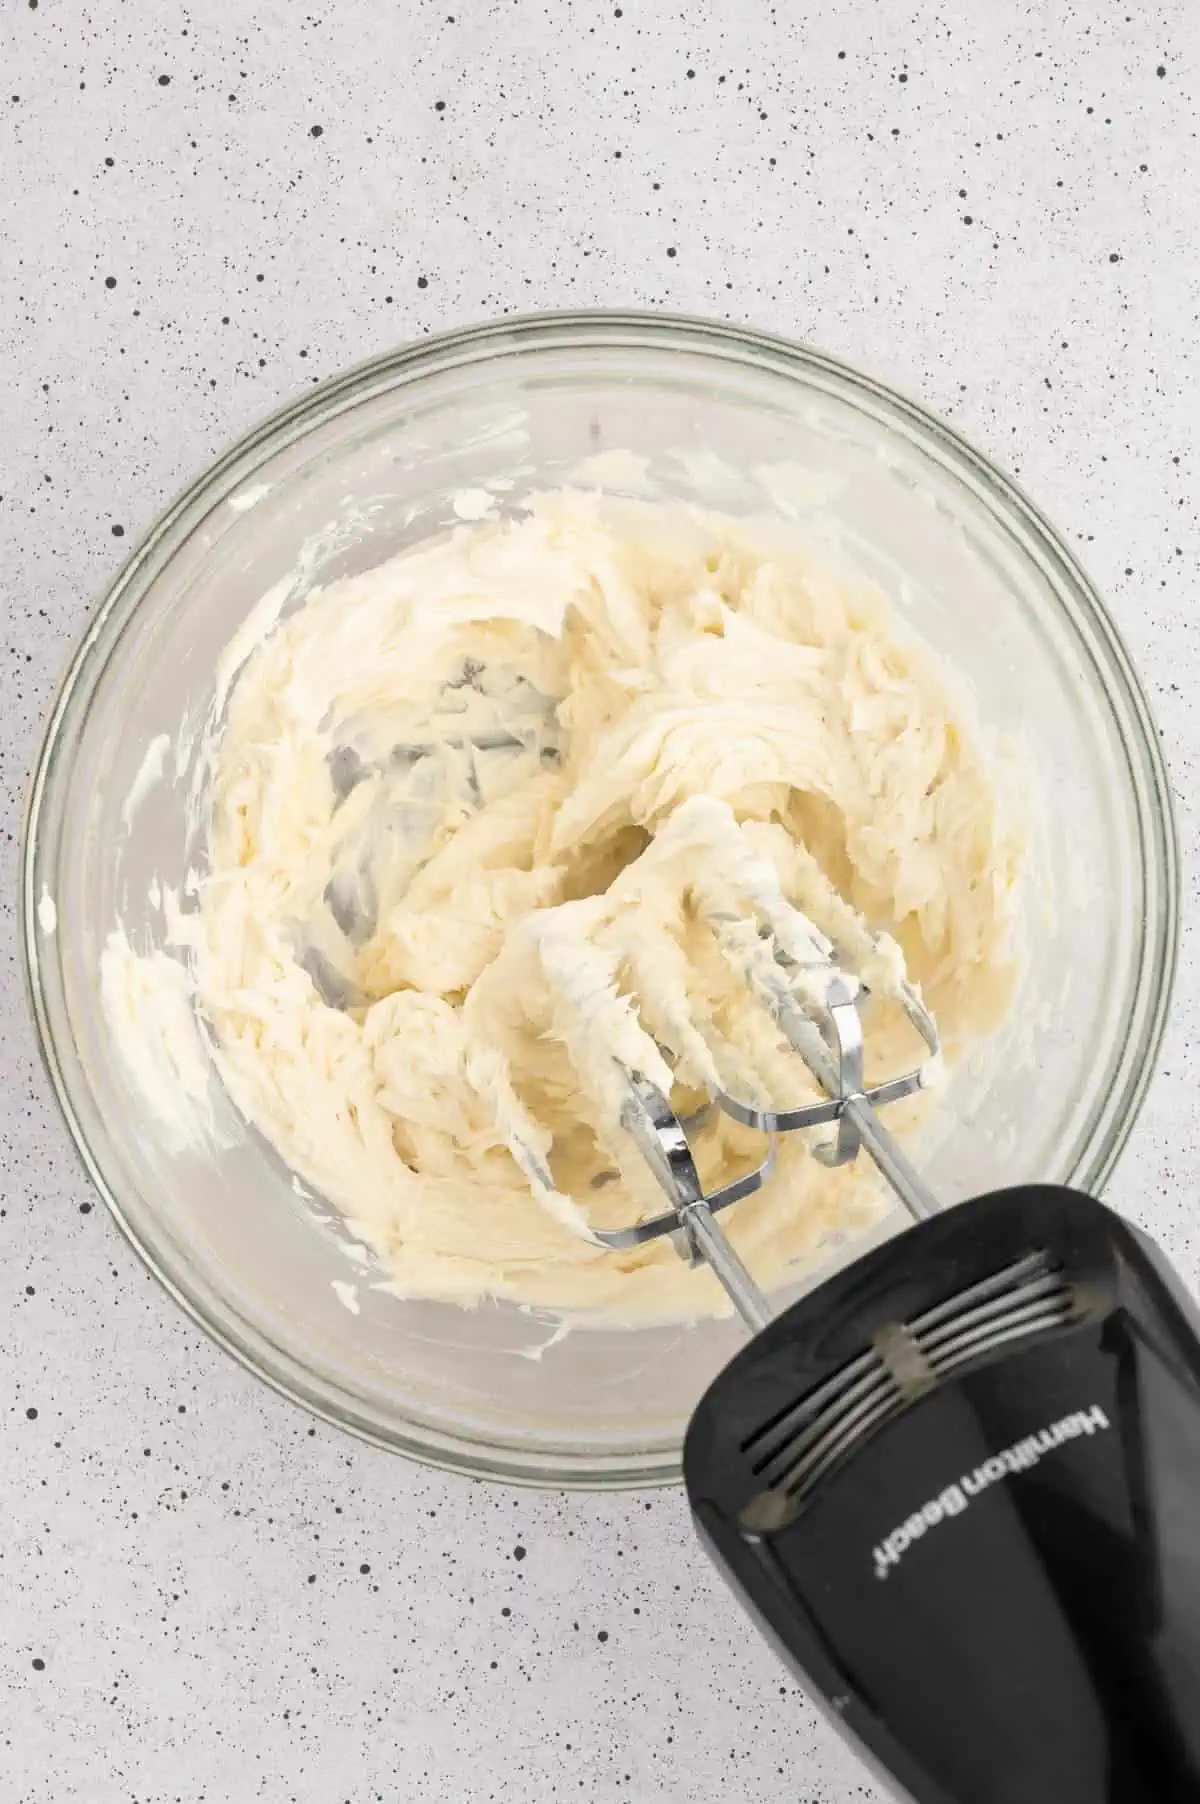 Whipped vegan butter in a mixing bowl with a hand mixer.